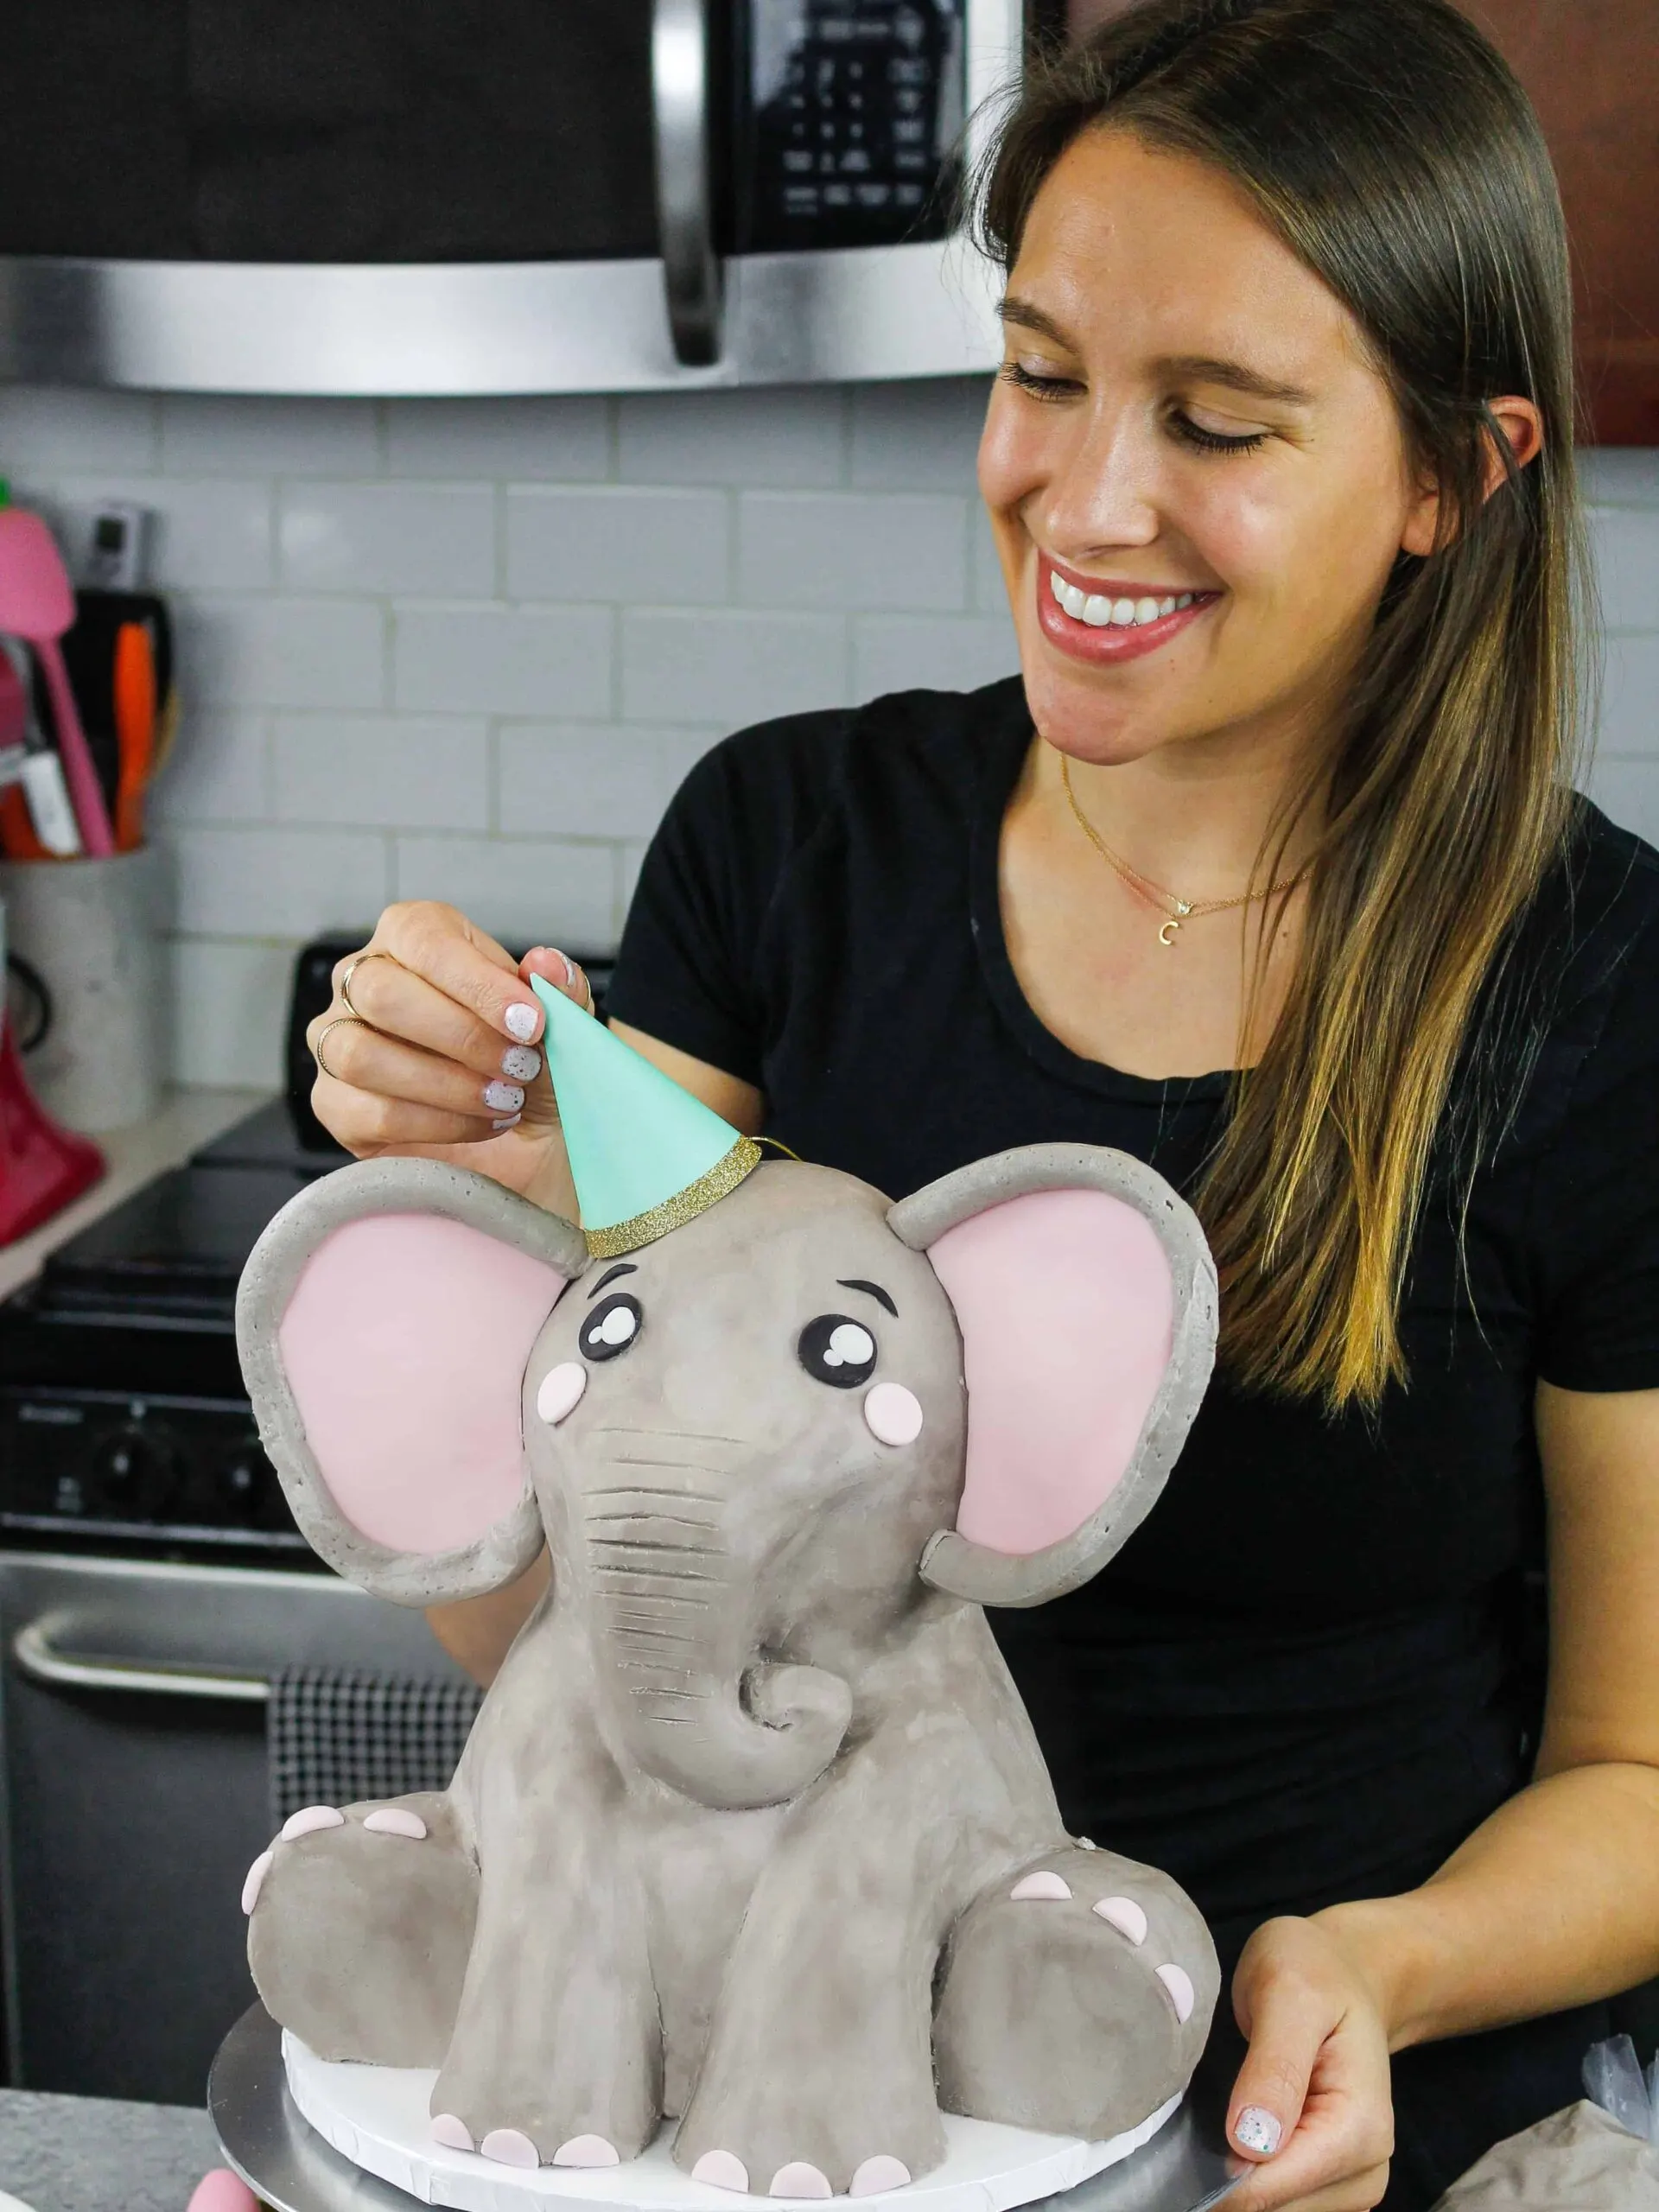 image of an elephant cake being made for a baby shower with a party hat